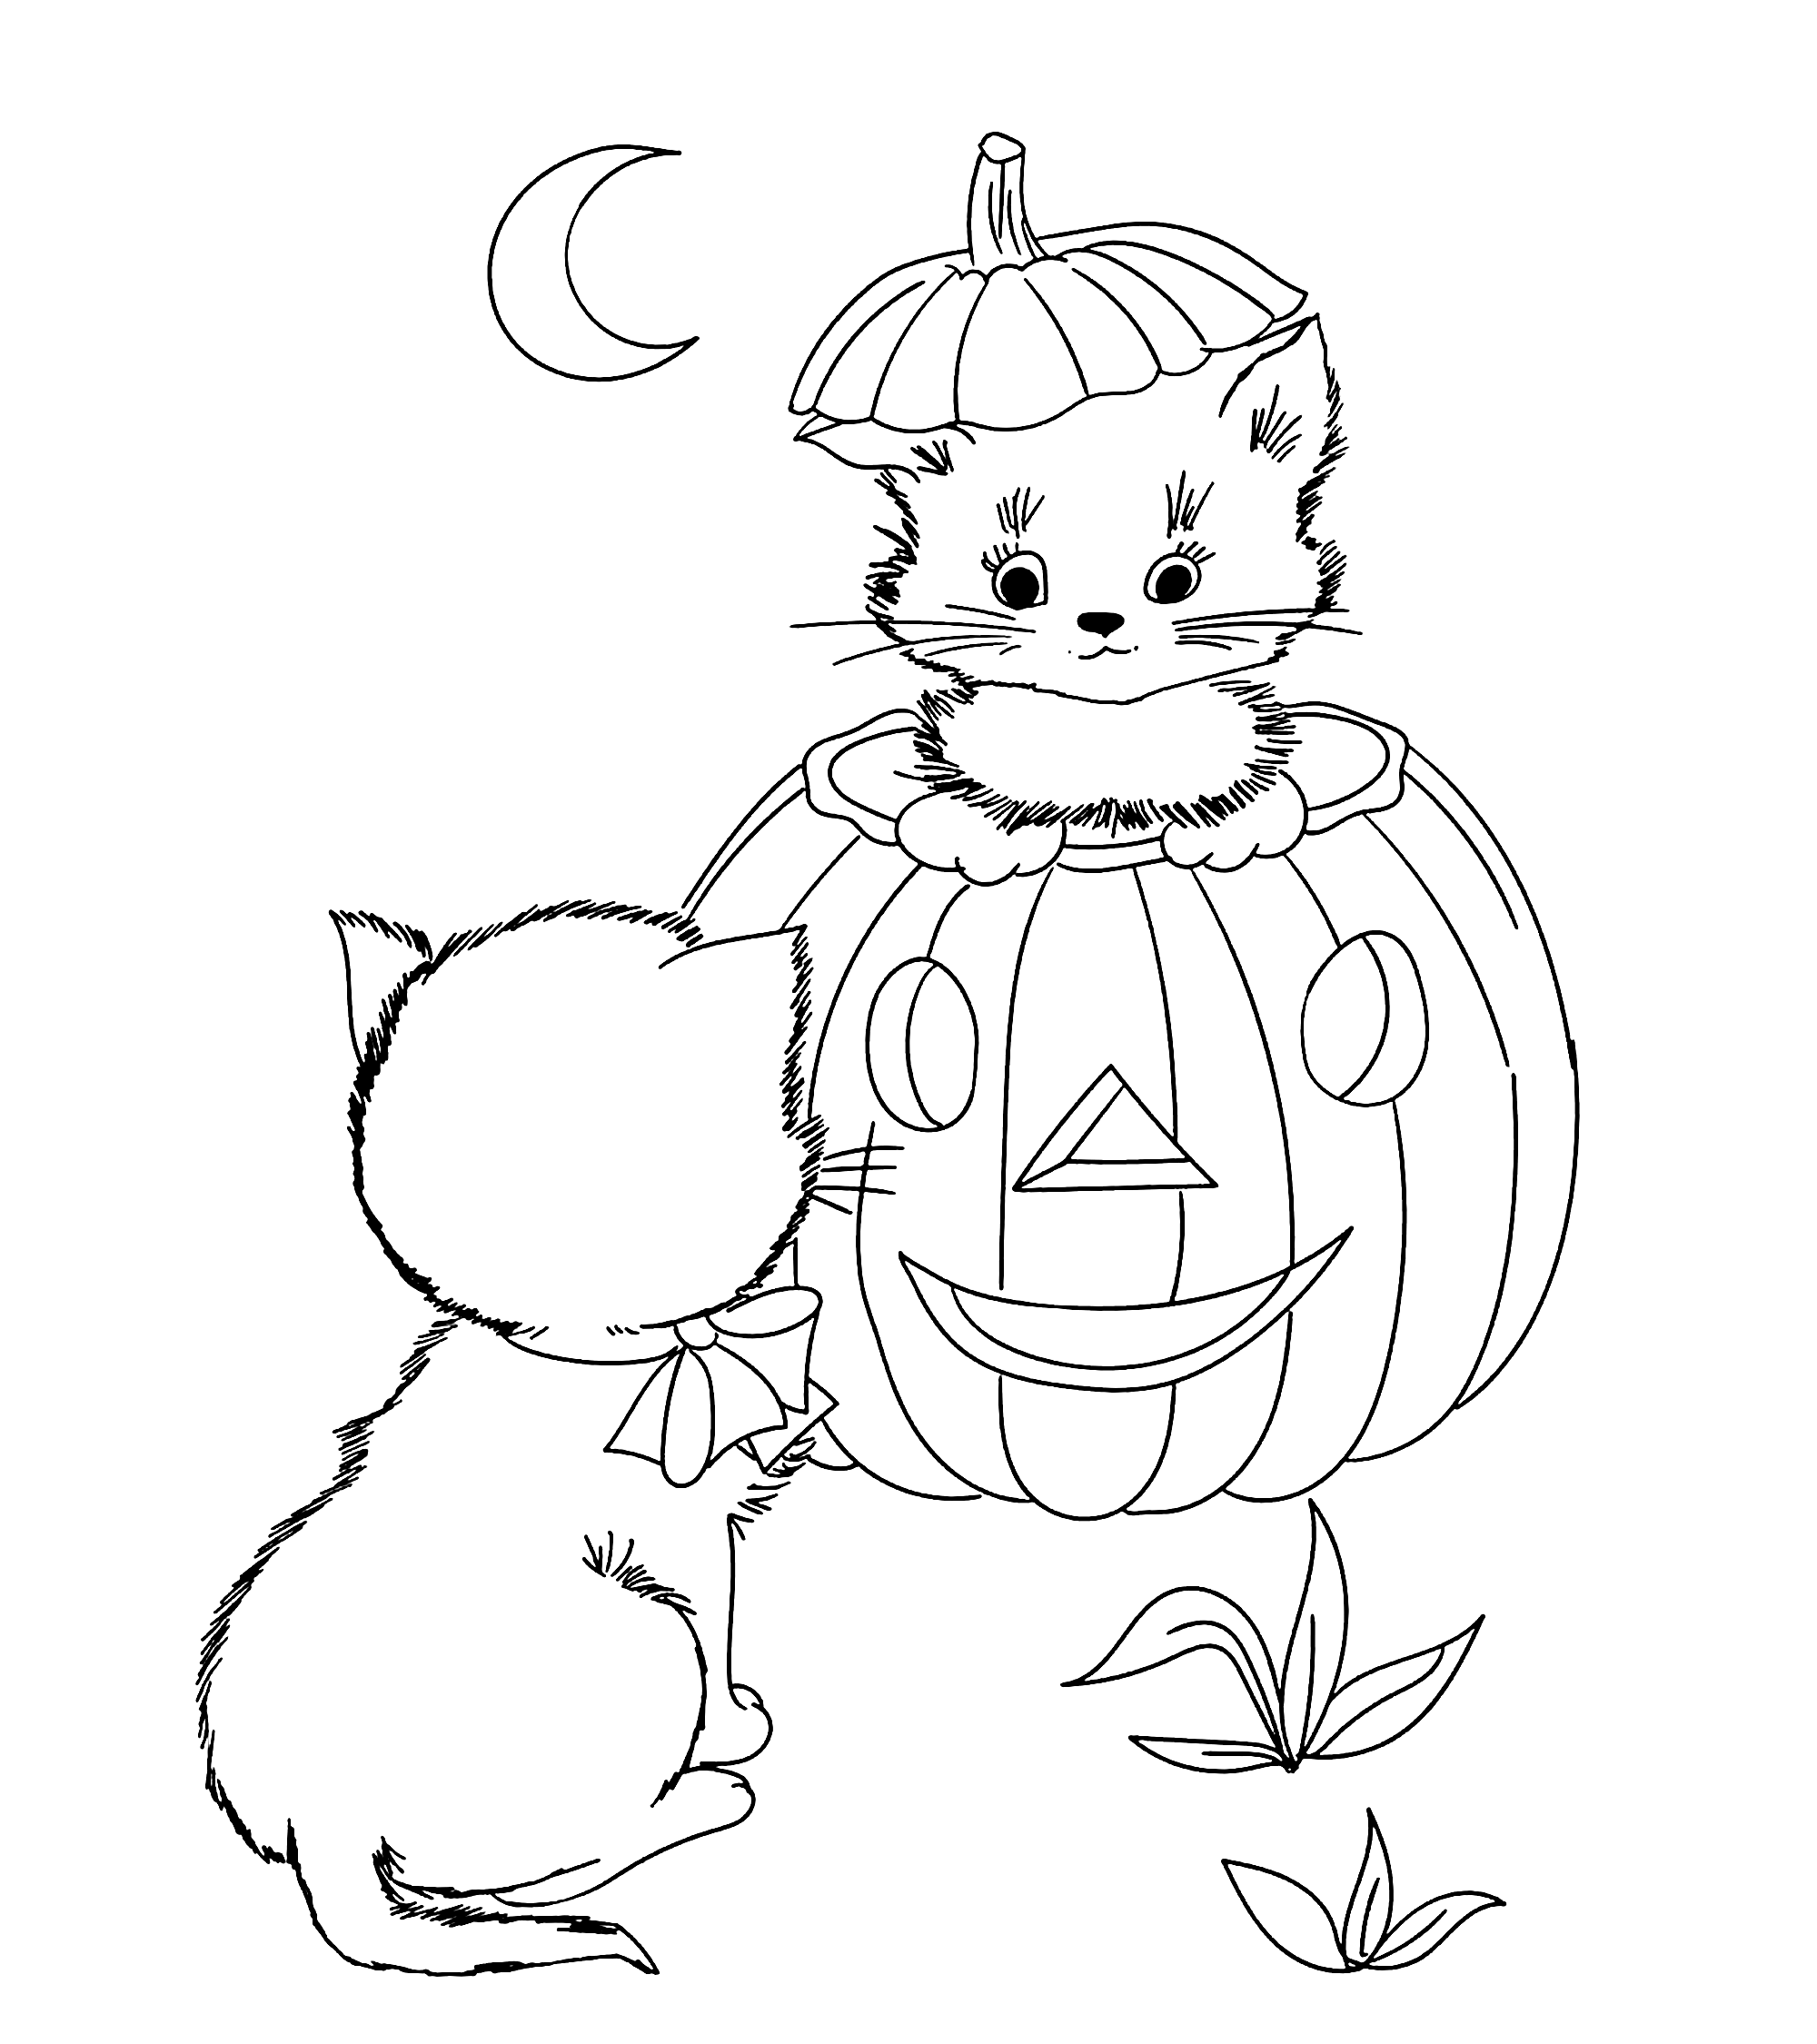 Coloring Page of Cute Little Kittens in Carved Pumpkin for Halloween